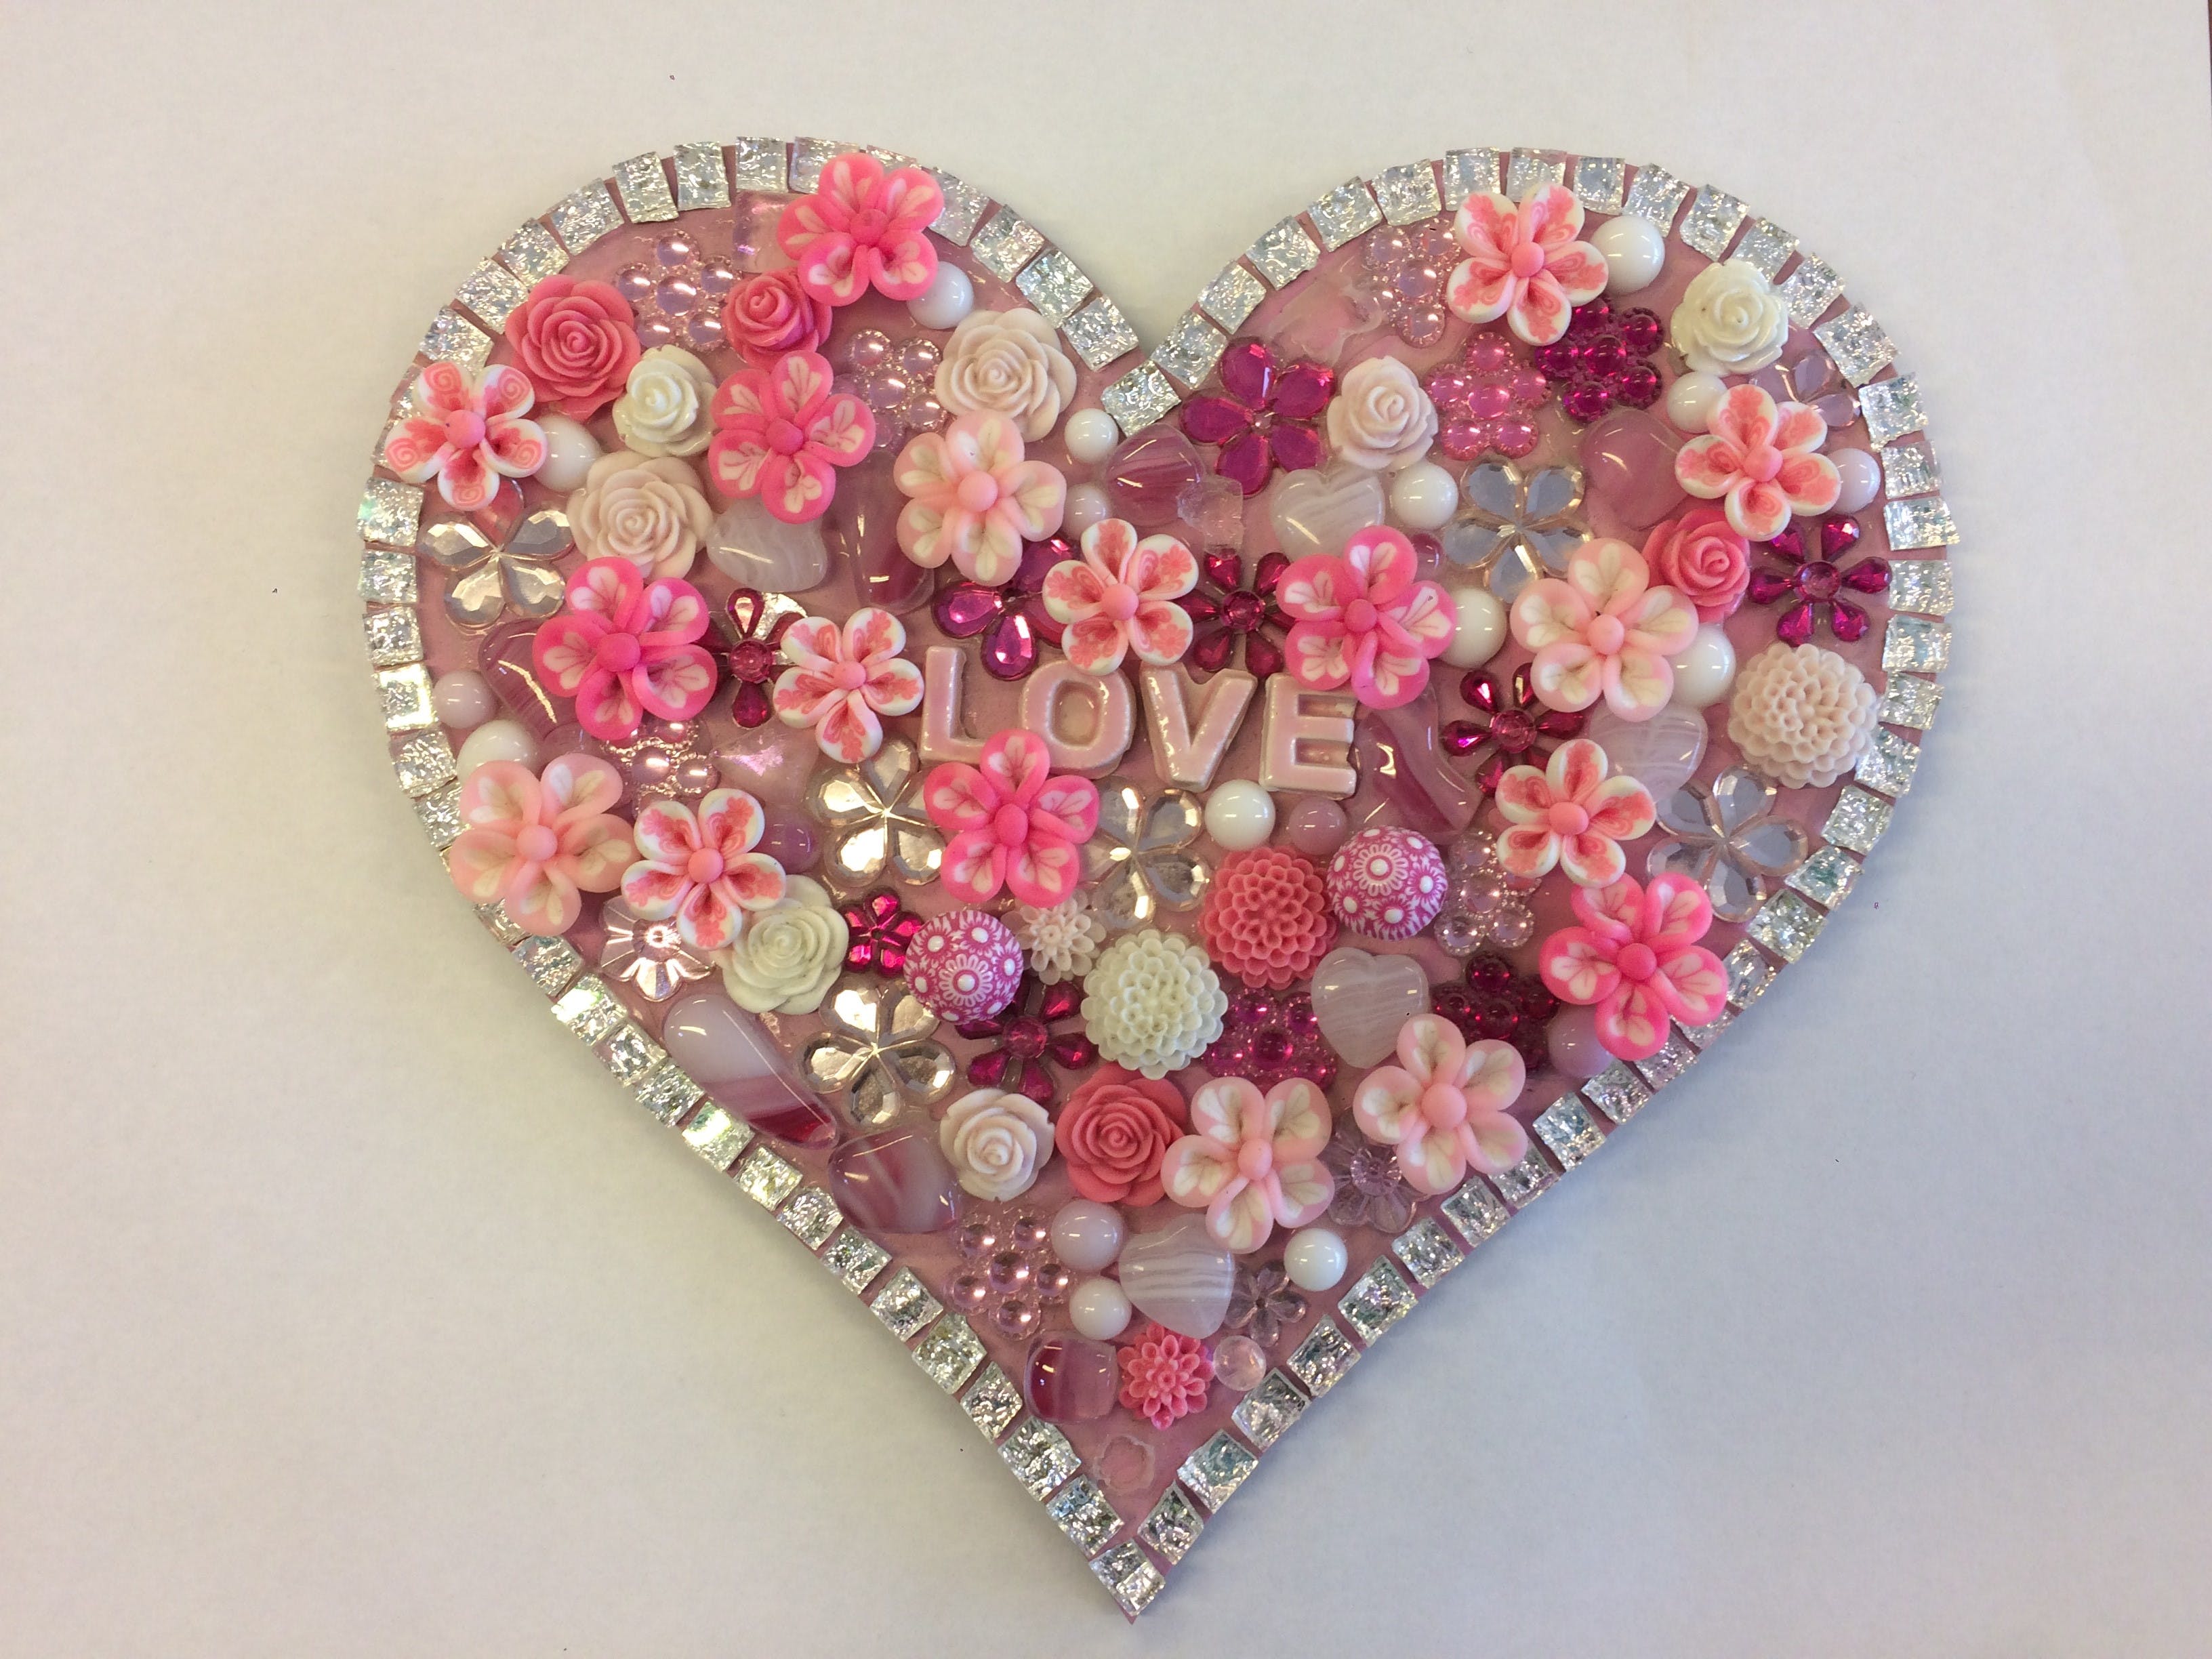 Flowers and Bling Mosaic Class for Kids - Perisher Accommodation